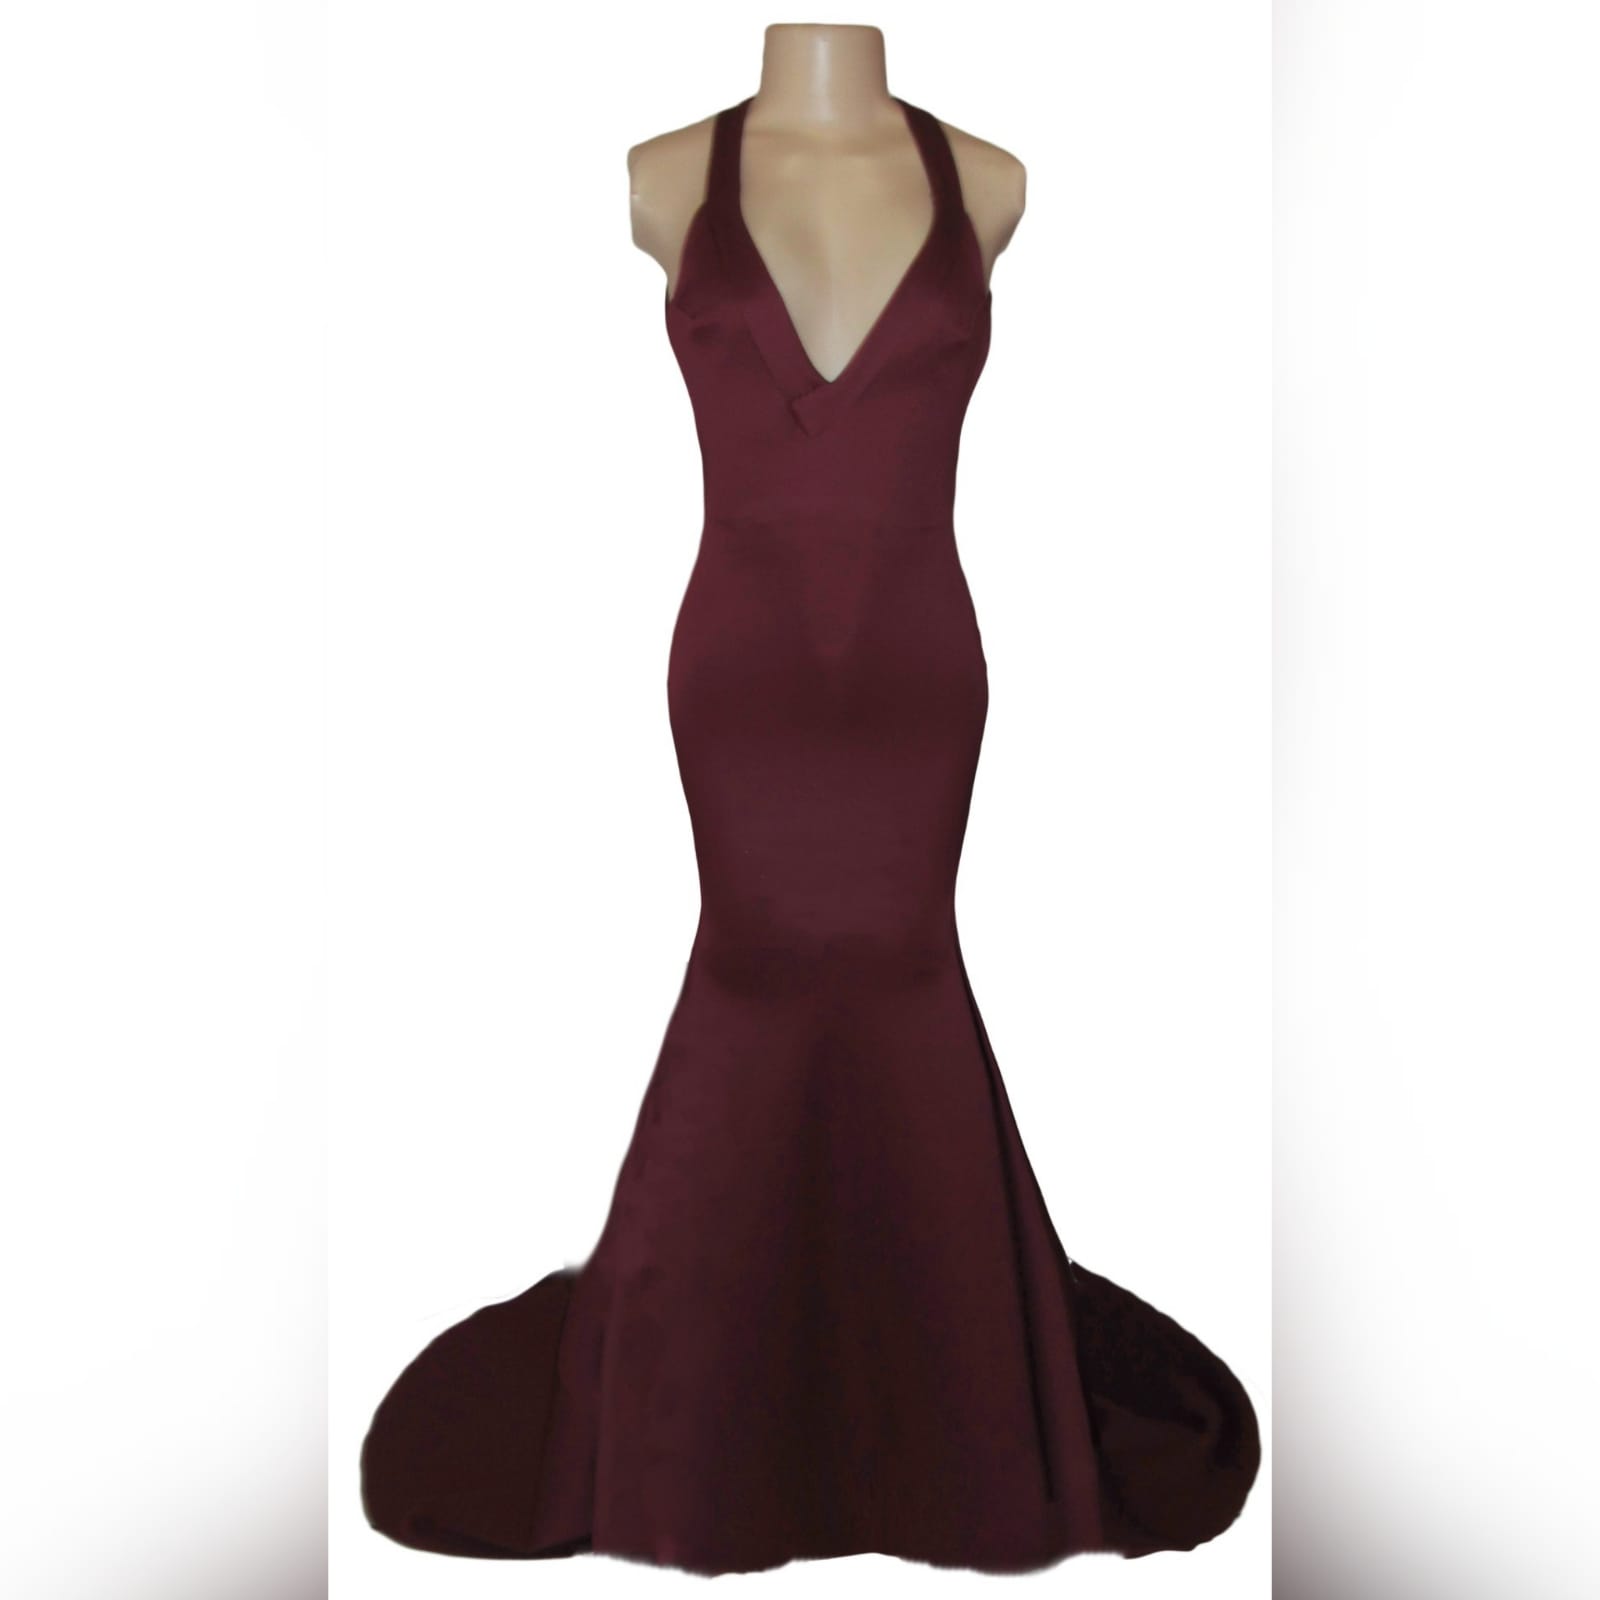 Burgundy soft mermaid sexy matric dress 6 burgundy soft mermaid sexy matric dress with a v neckline, low naked back and a train.